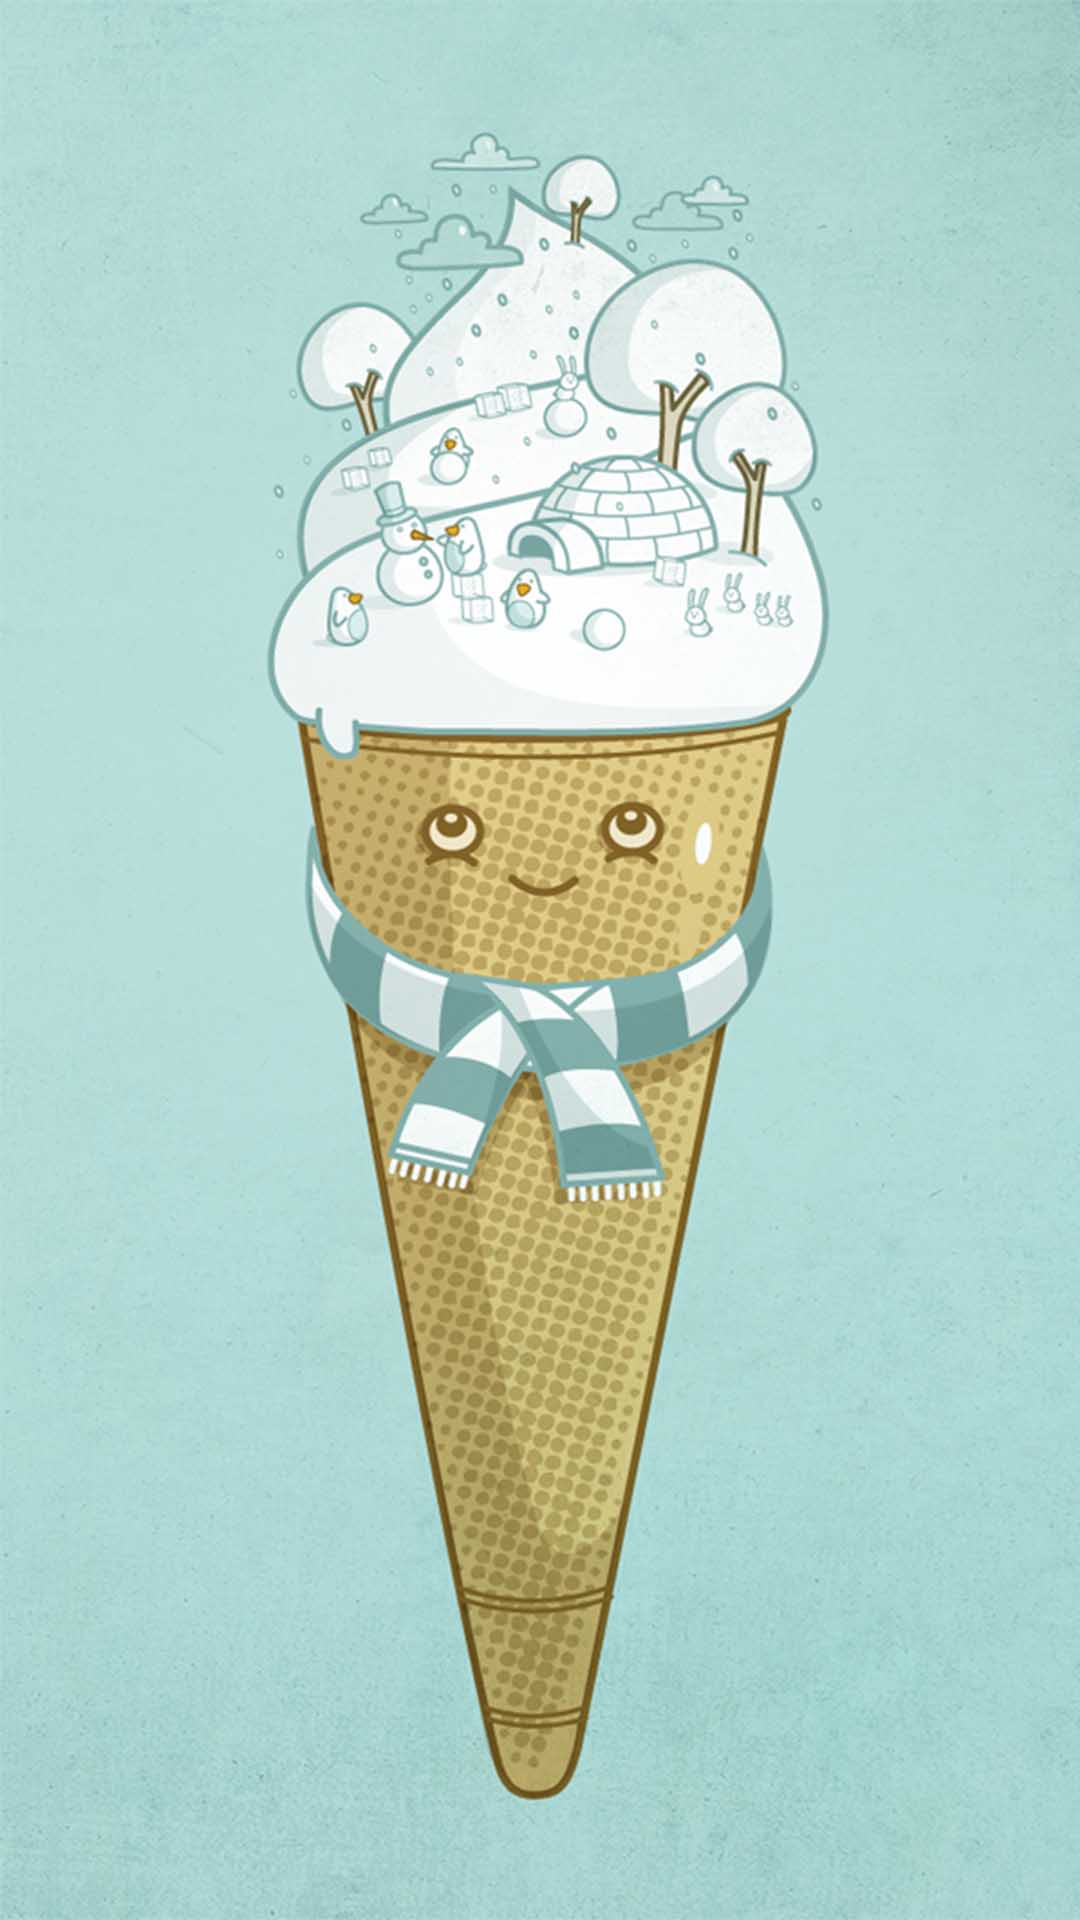 Tap image for more cute funny iPhone wallpaper! Ice cream